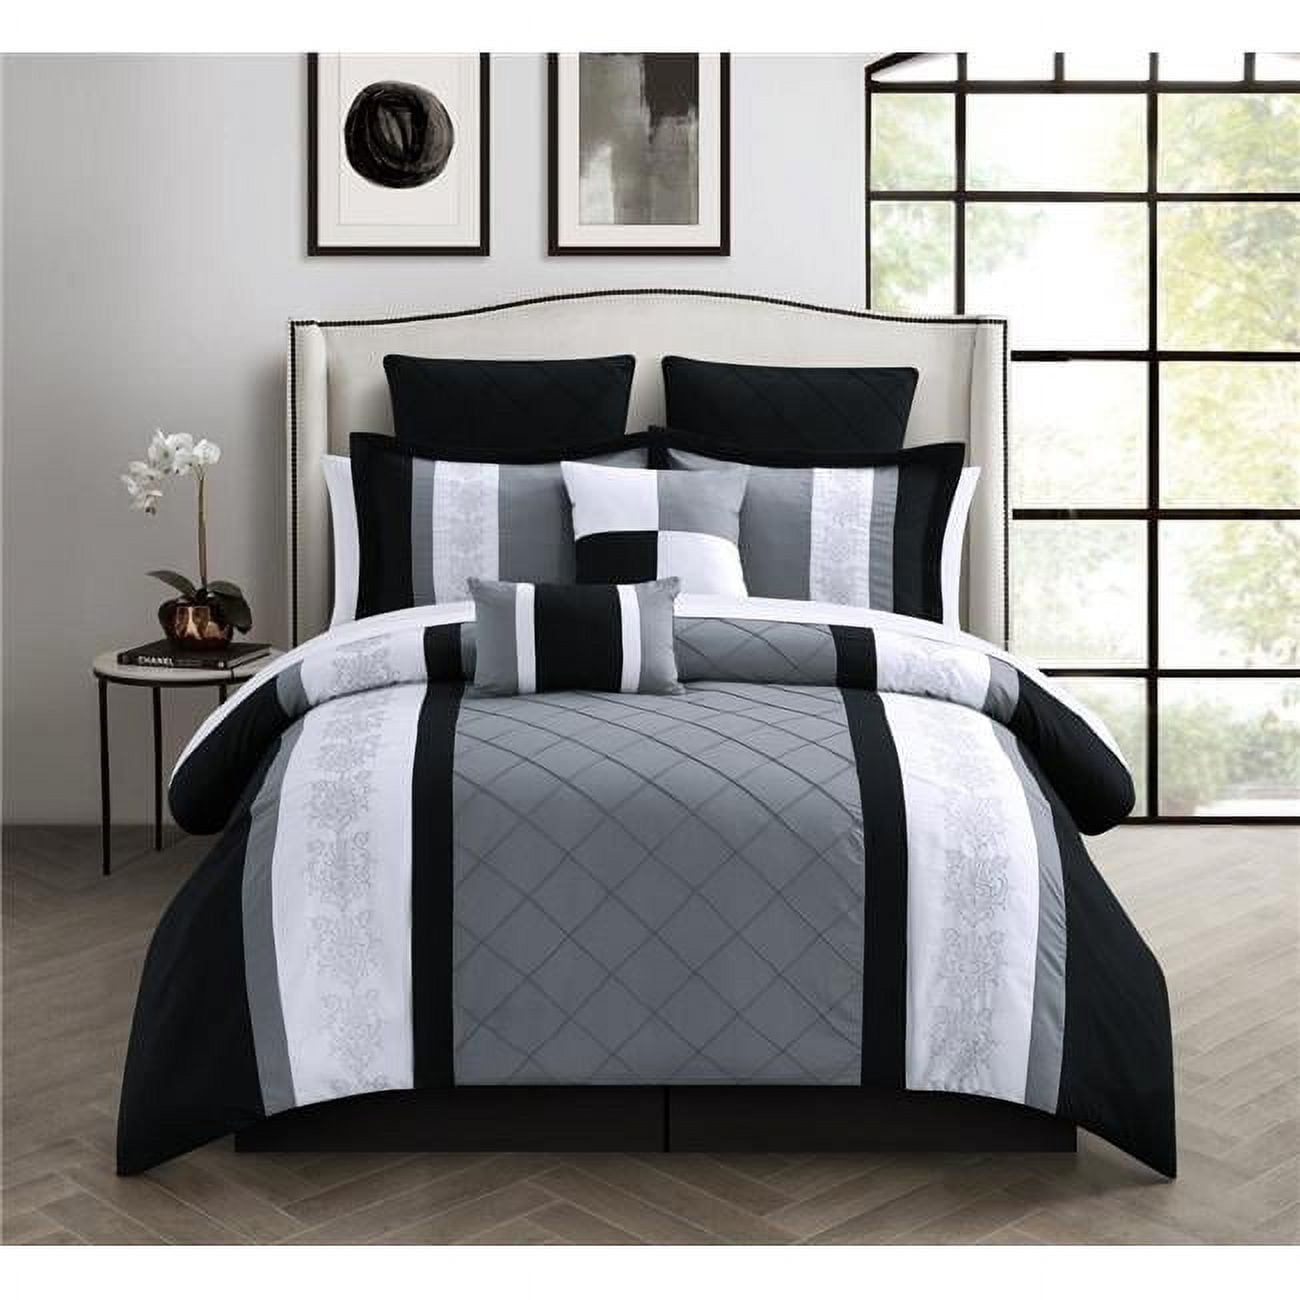 35-89-k-12-us Livingston 12 Piece Bed In A Bag Embroidered Comforter Set With 4 Piece Sheet Set, Black - King